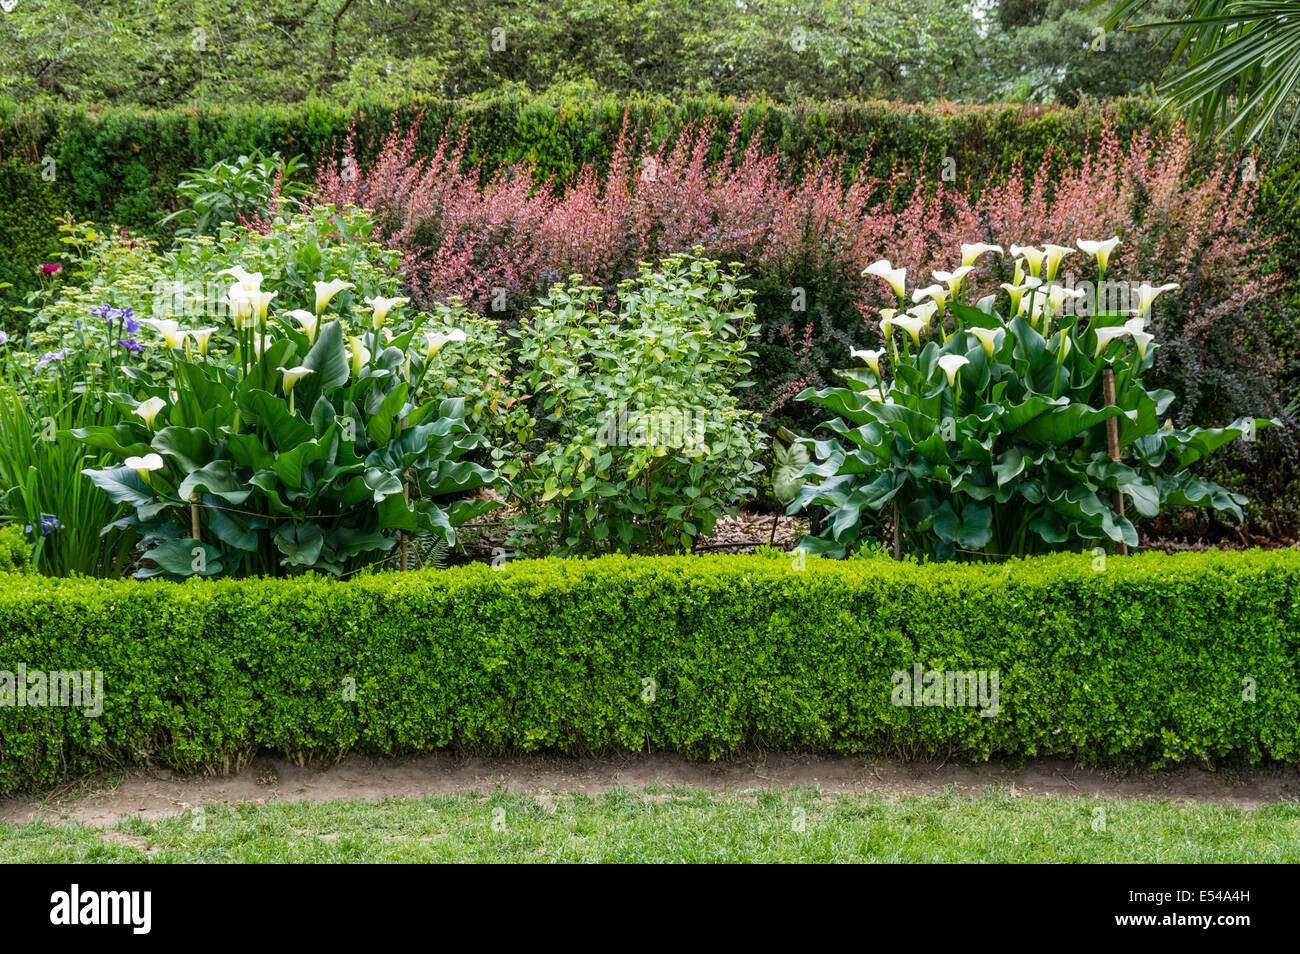 A planted garden with hedge and blooming Calla Lilies Stock Photo